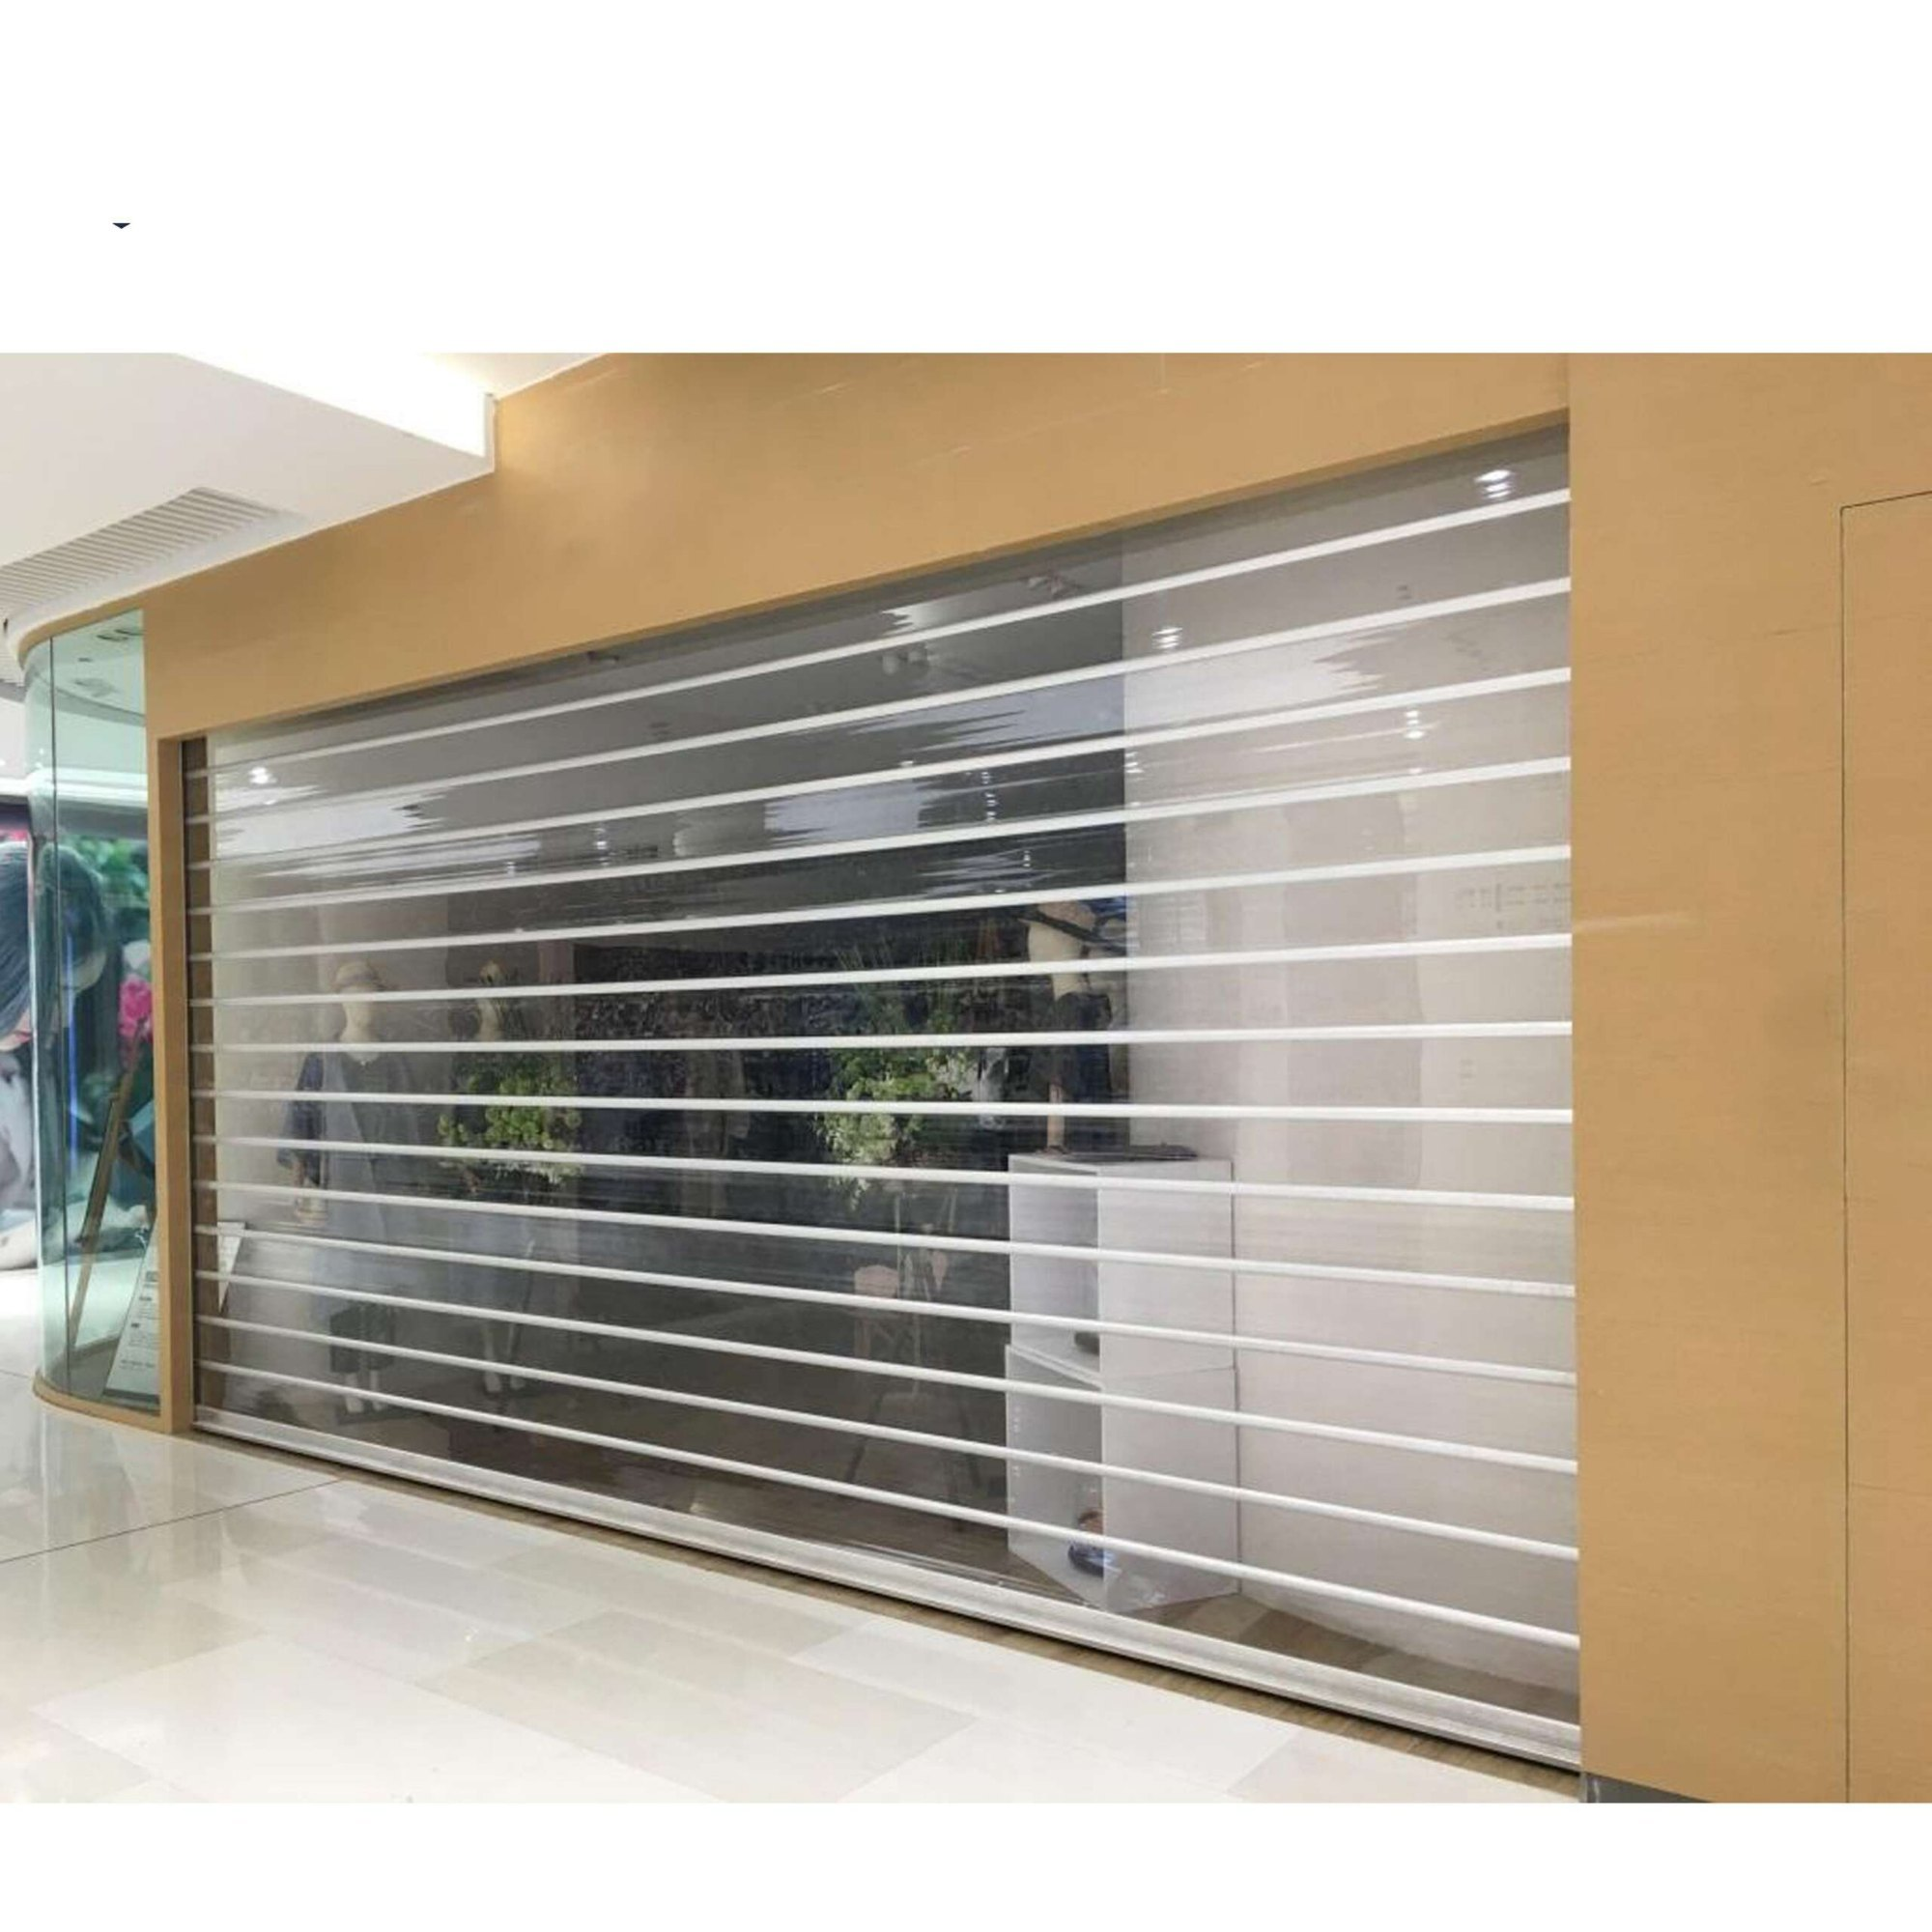 Acrylic Rolling Shutter Manufacturers in Chennai